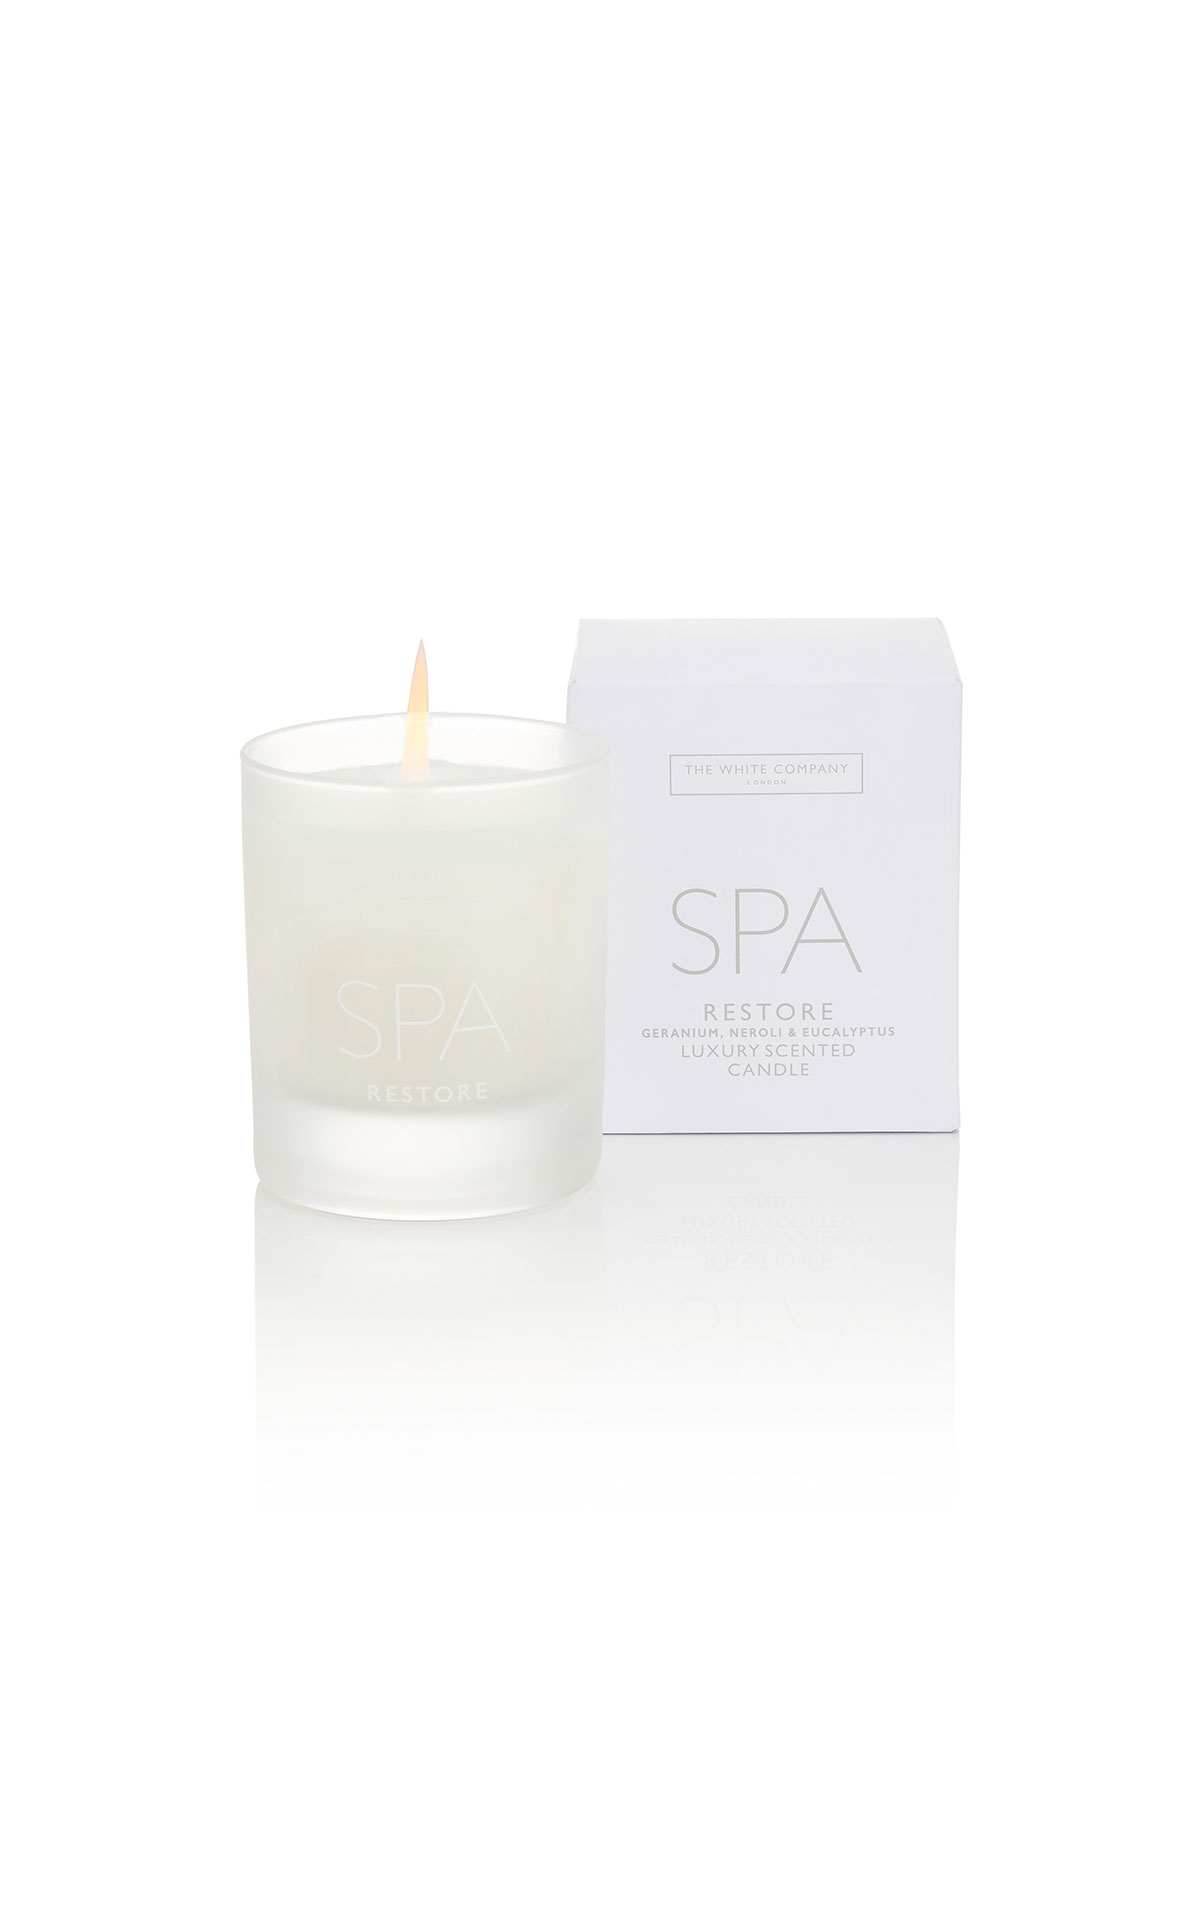 The White Company SPA restore signature candle from Bicester Village